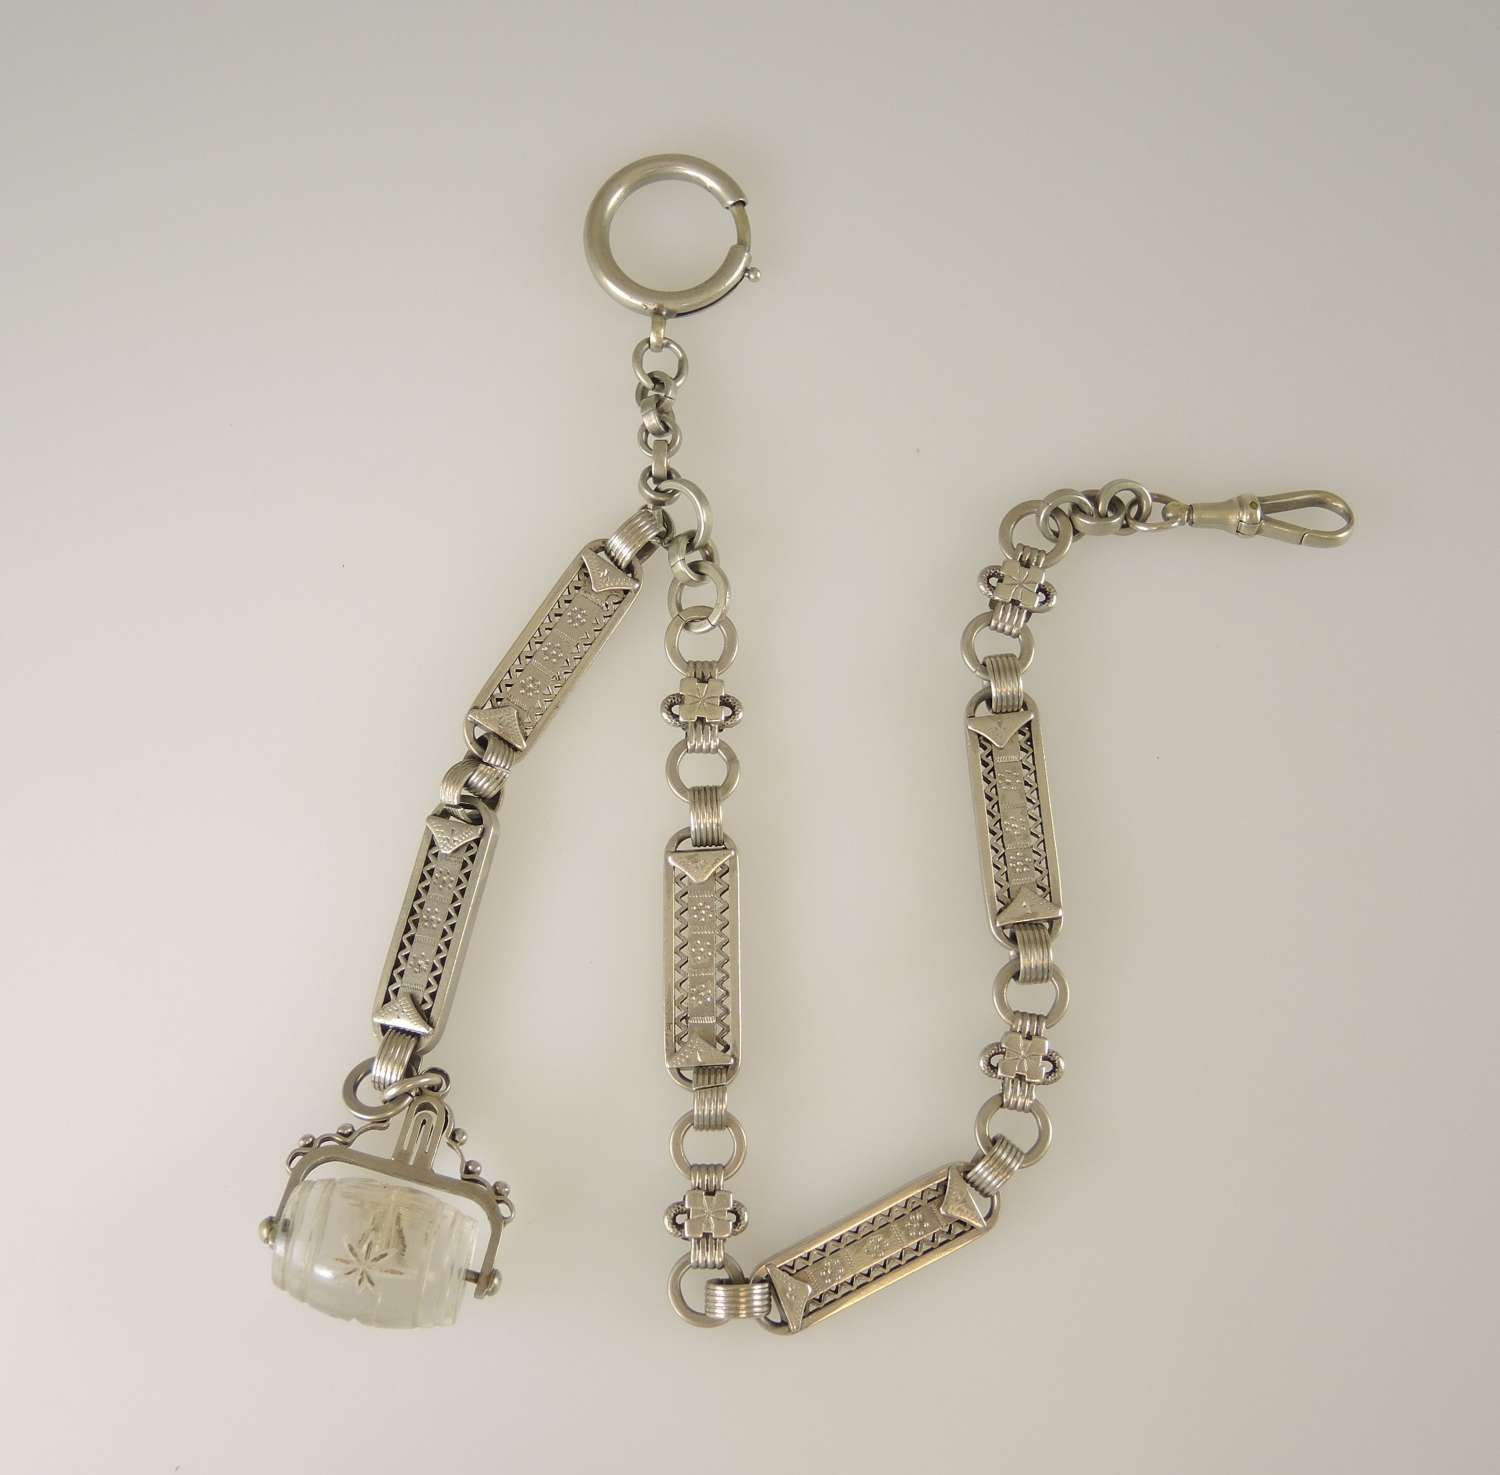 Impressive watch chain with glass barrel spinner fob c1890